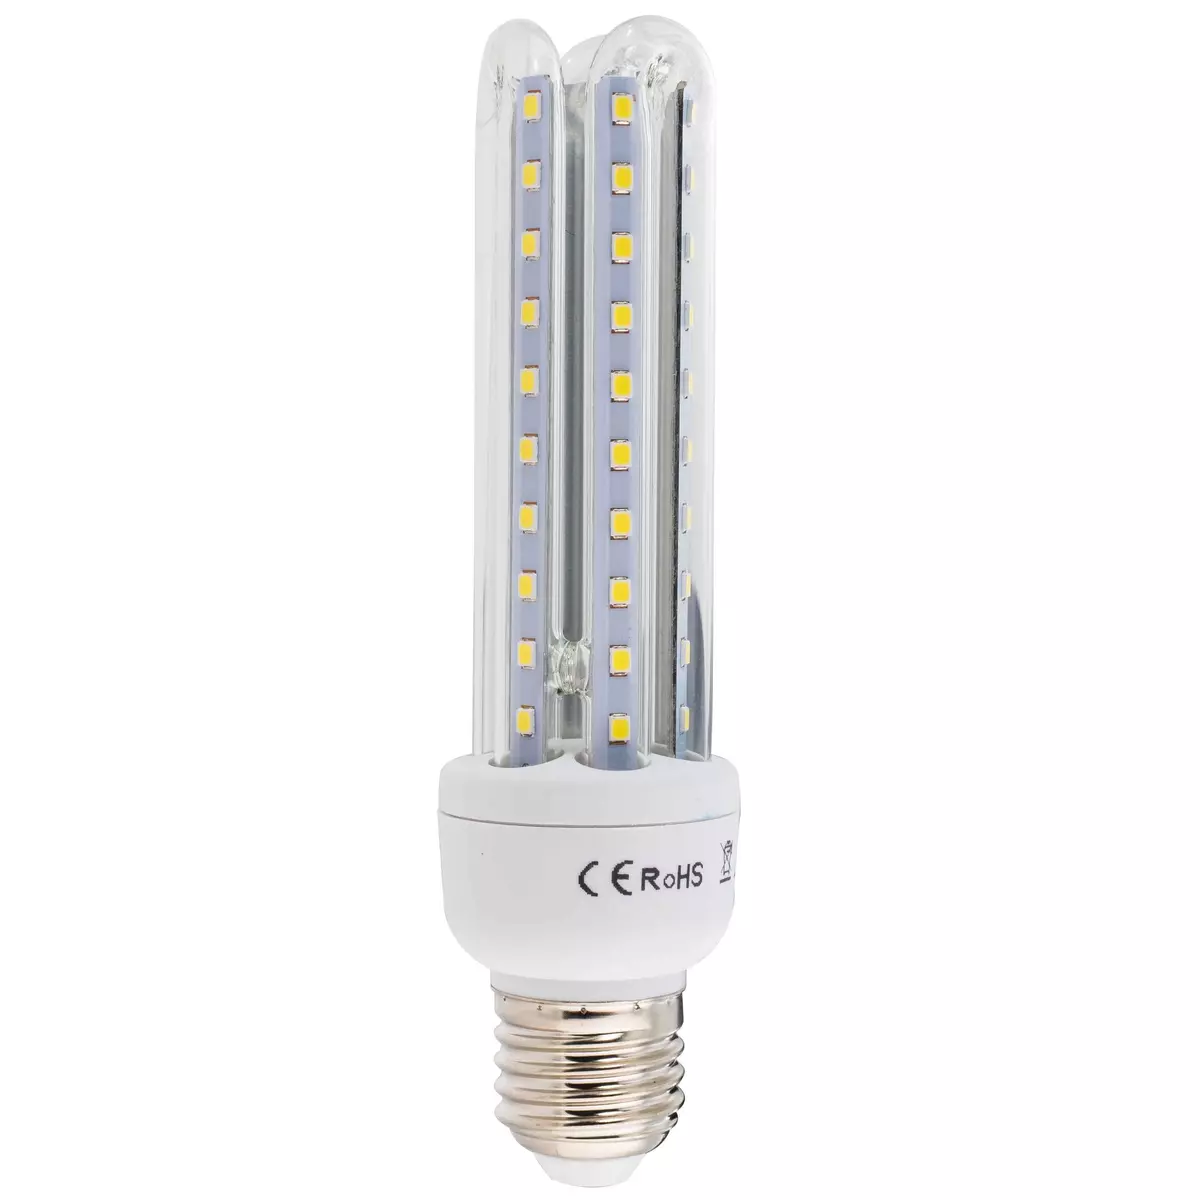 Homepluss Ampoule led 3 tubes e27 8w blanc/froid